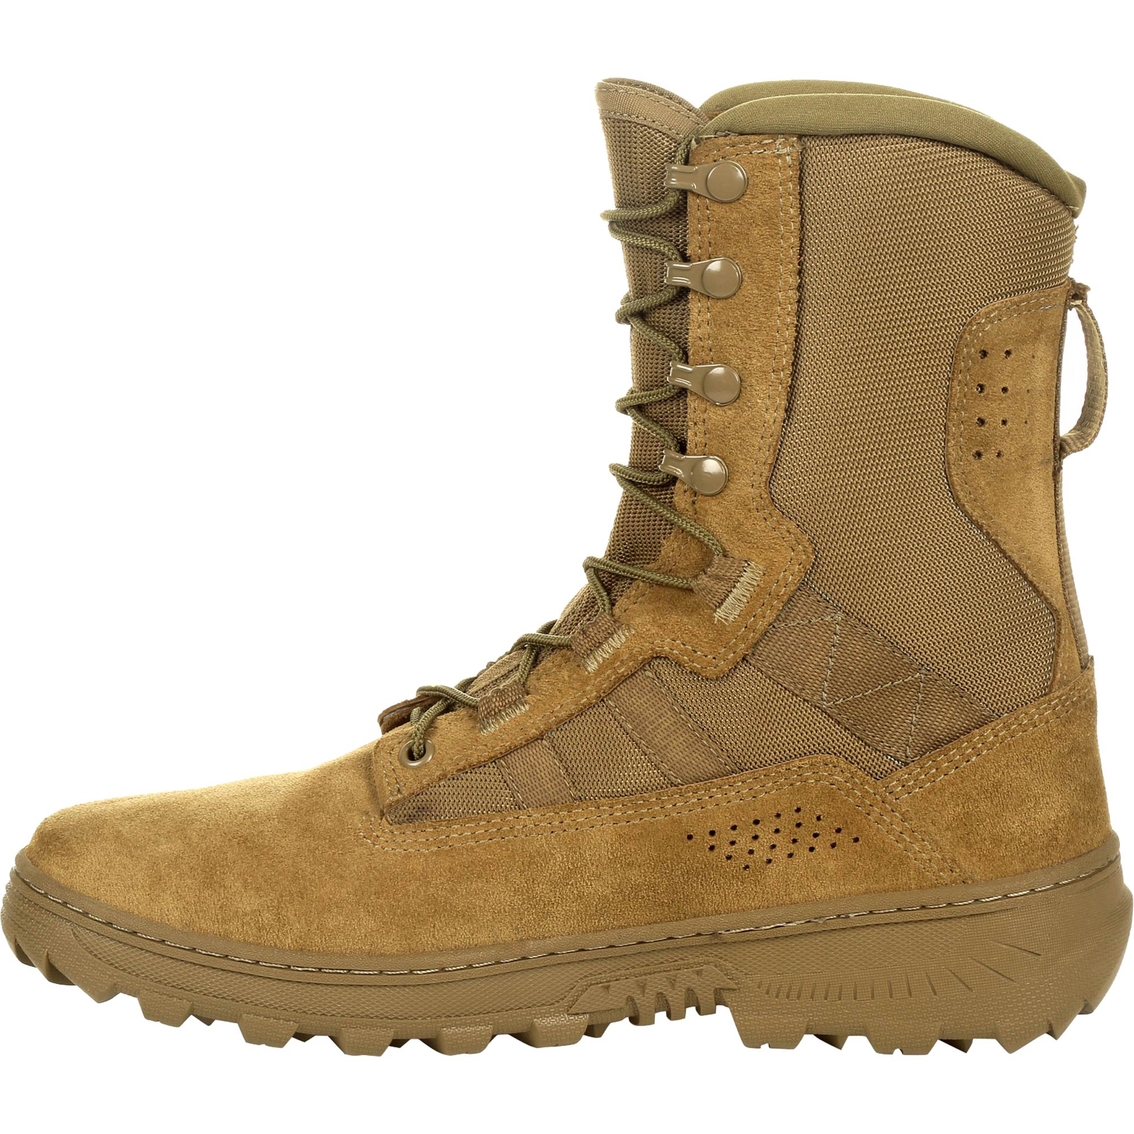 Rocky Havoc Commercial Military Boots - Image 3 of 7